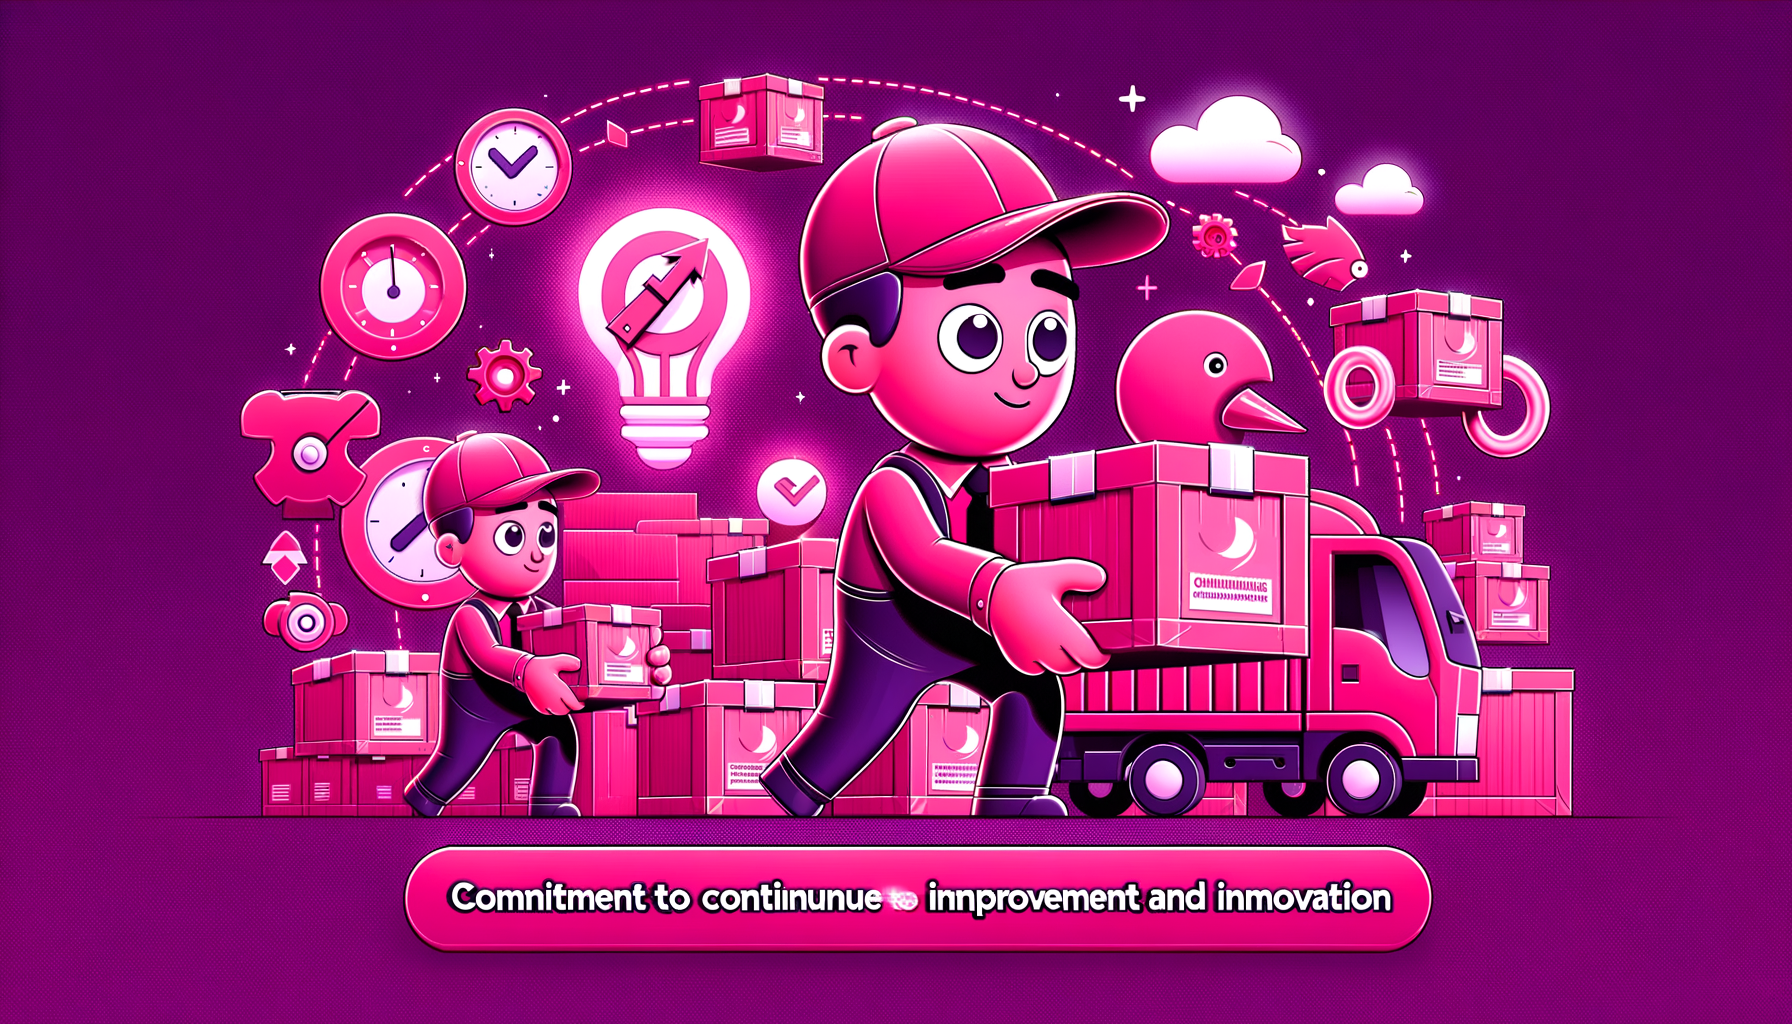 Cartoon illustration in fuschia tones showcasing a light bulb and a gear symbolizing innovation and continuous improvement.